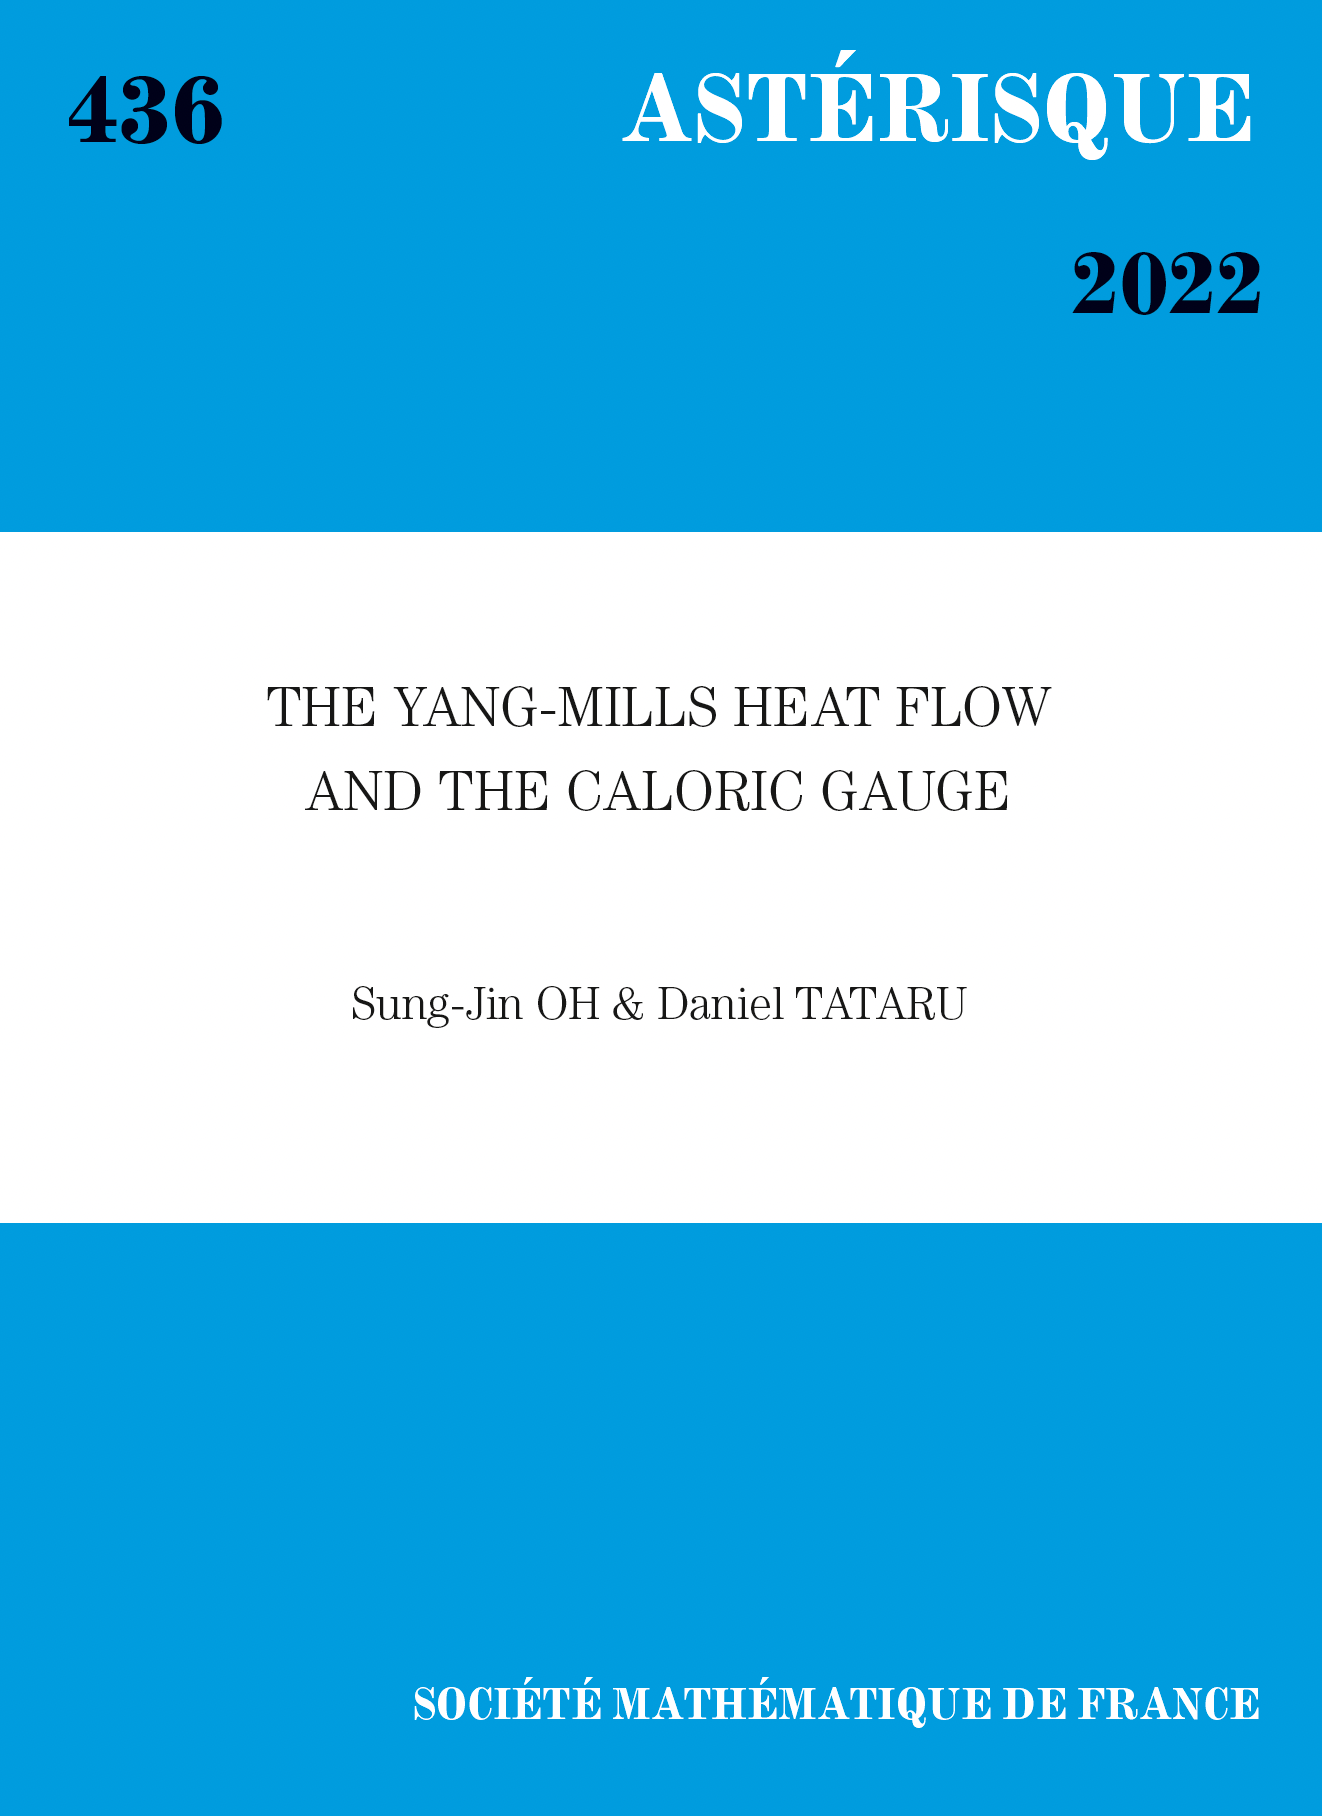 The Yang-Mills heat flow and the caloric gauge